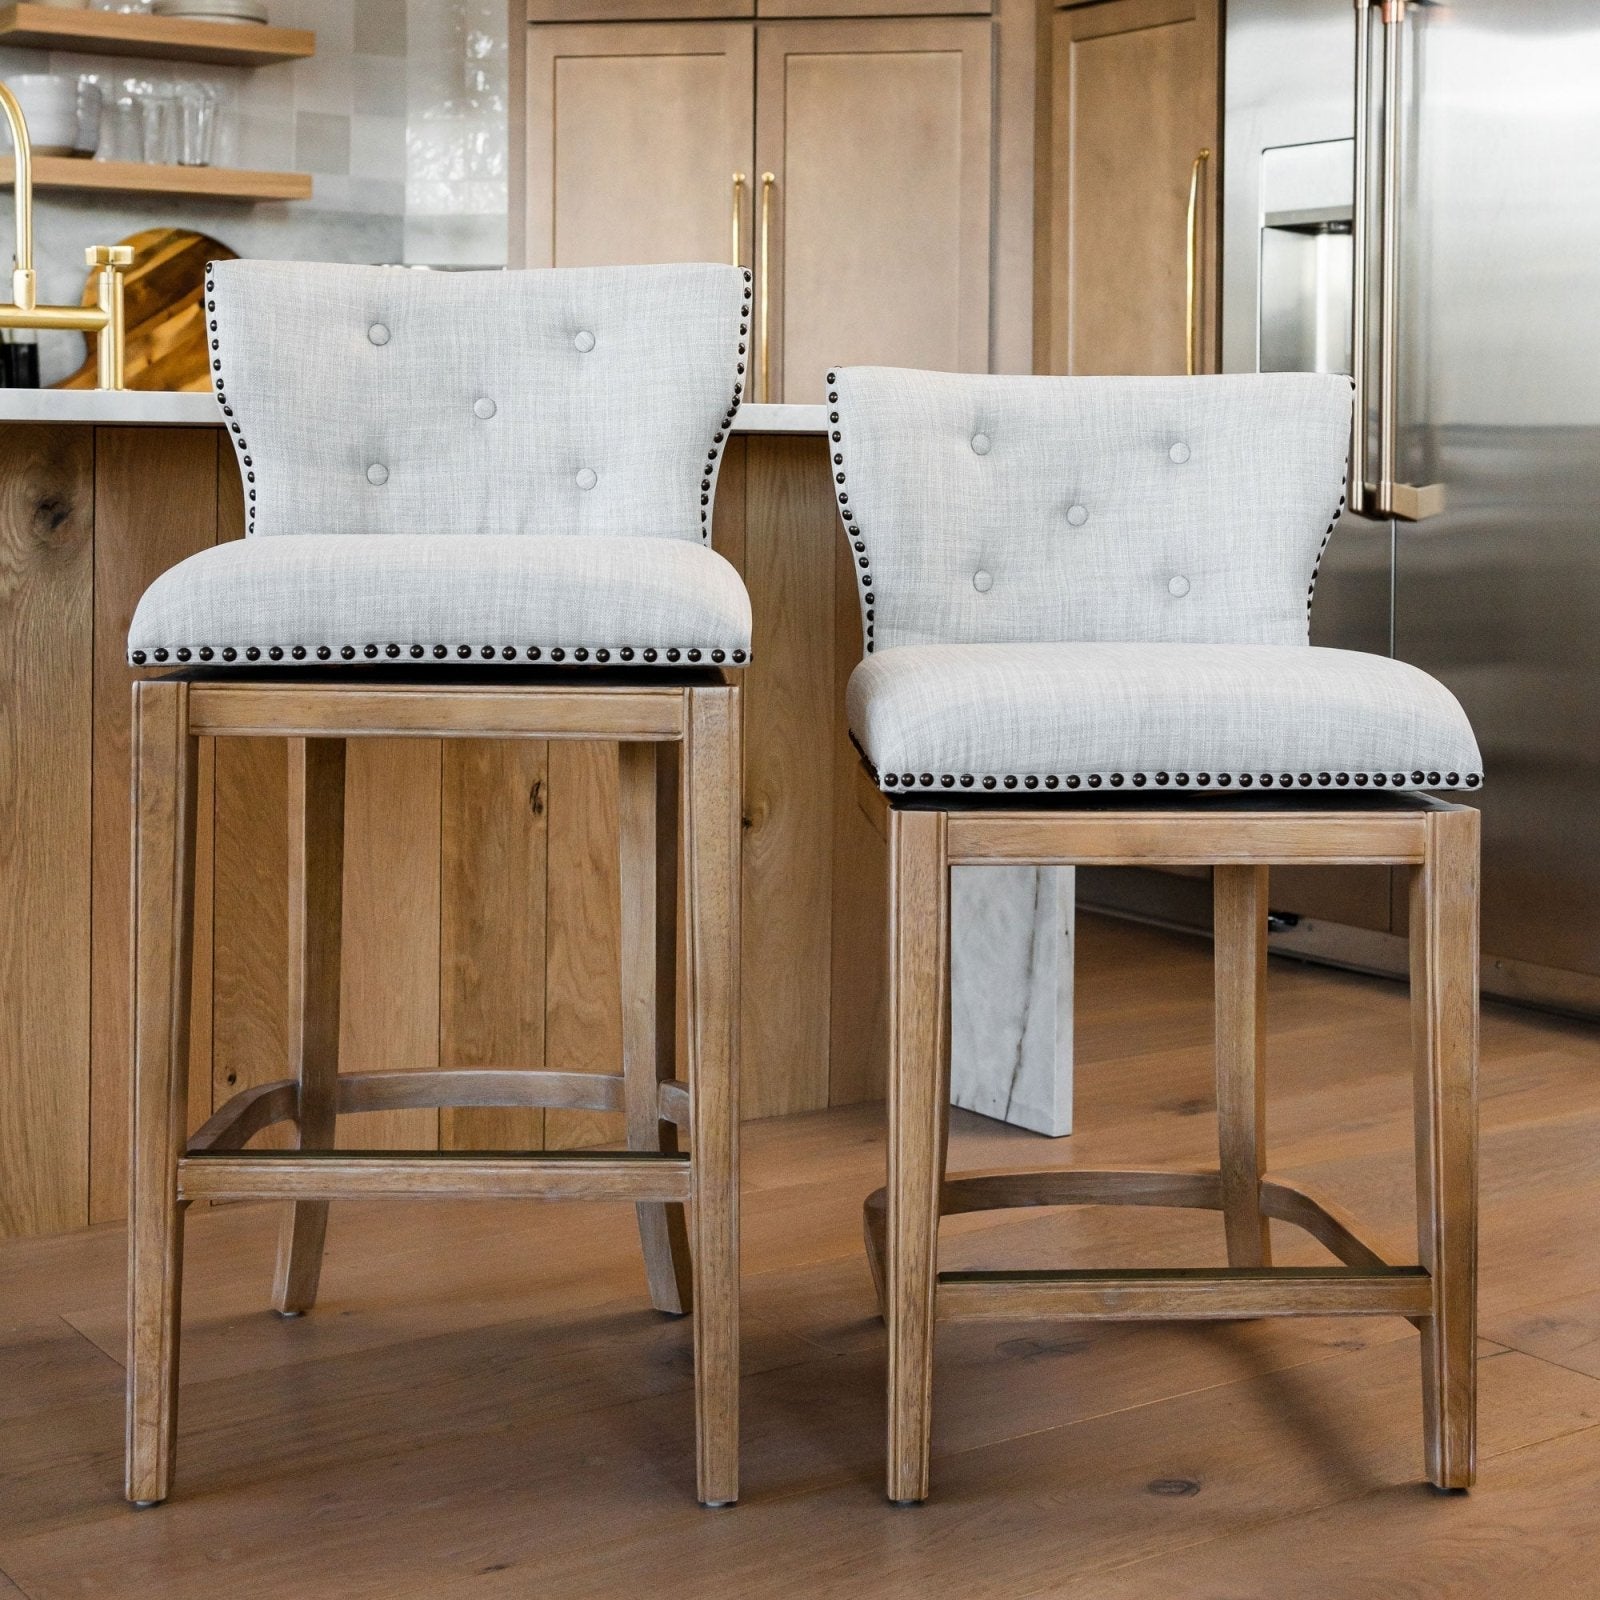 Hugo Bar Stool in Weathered Oak Finish with Sand Color Fabric Upholstery in Stools by Maven Lane